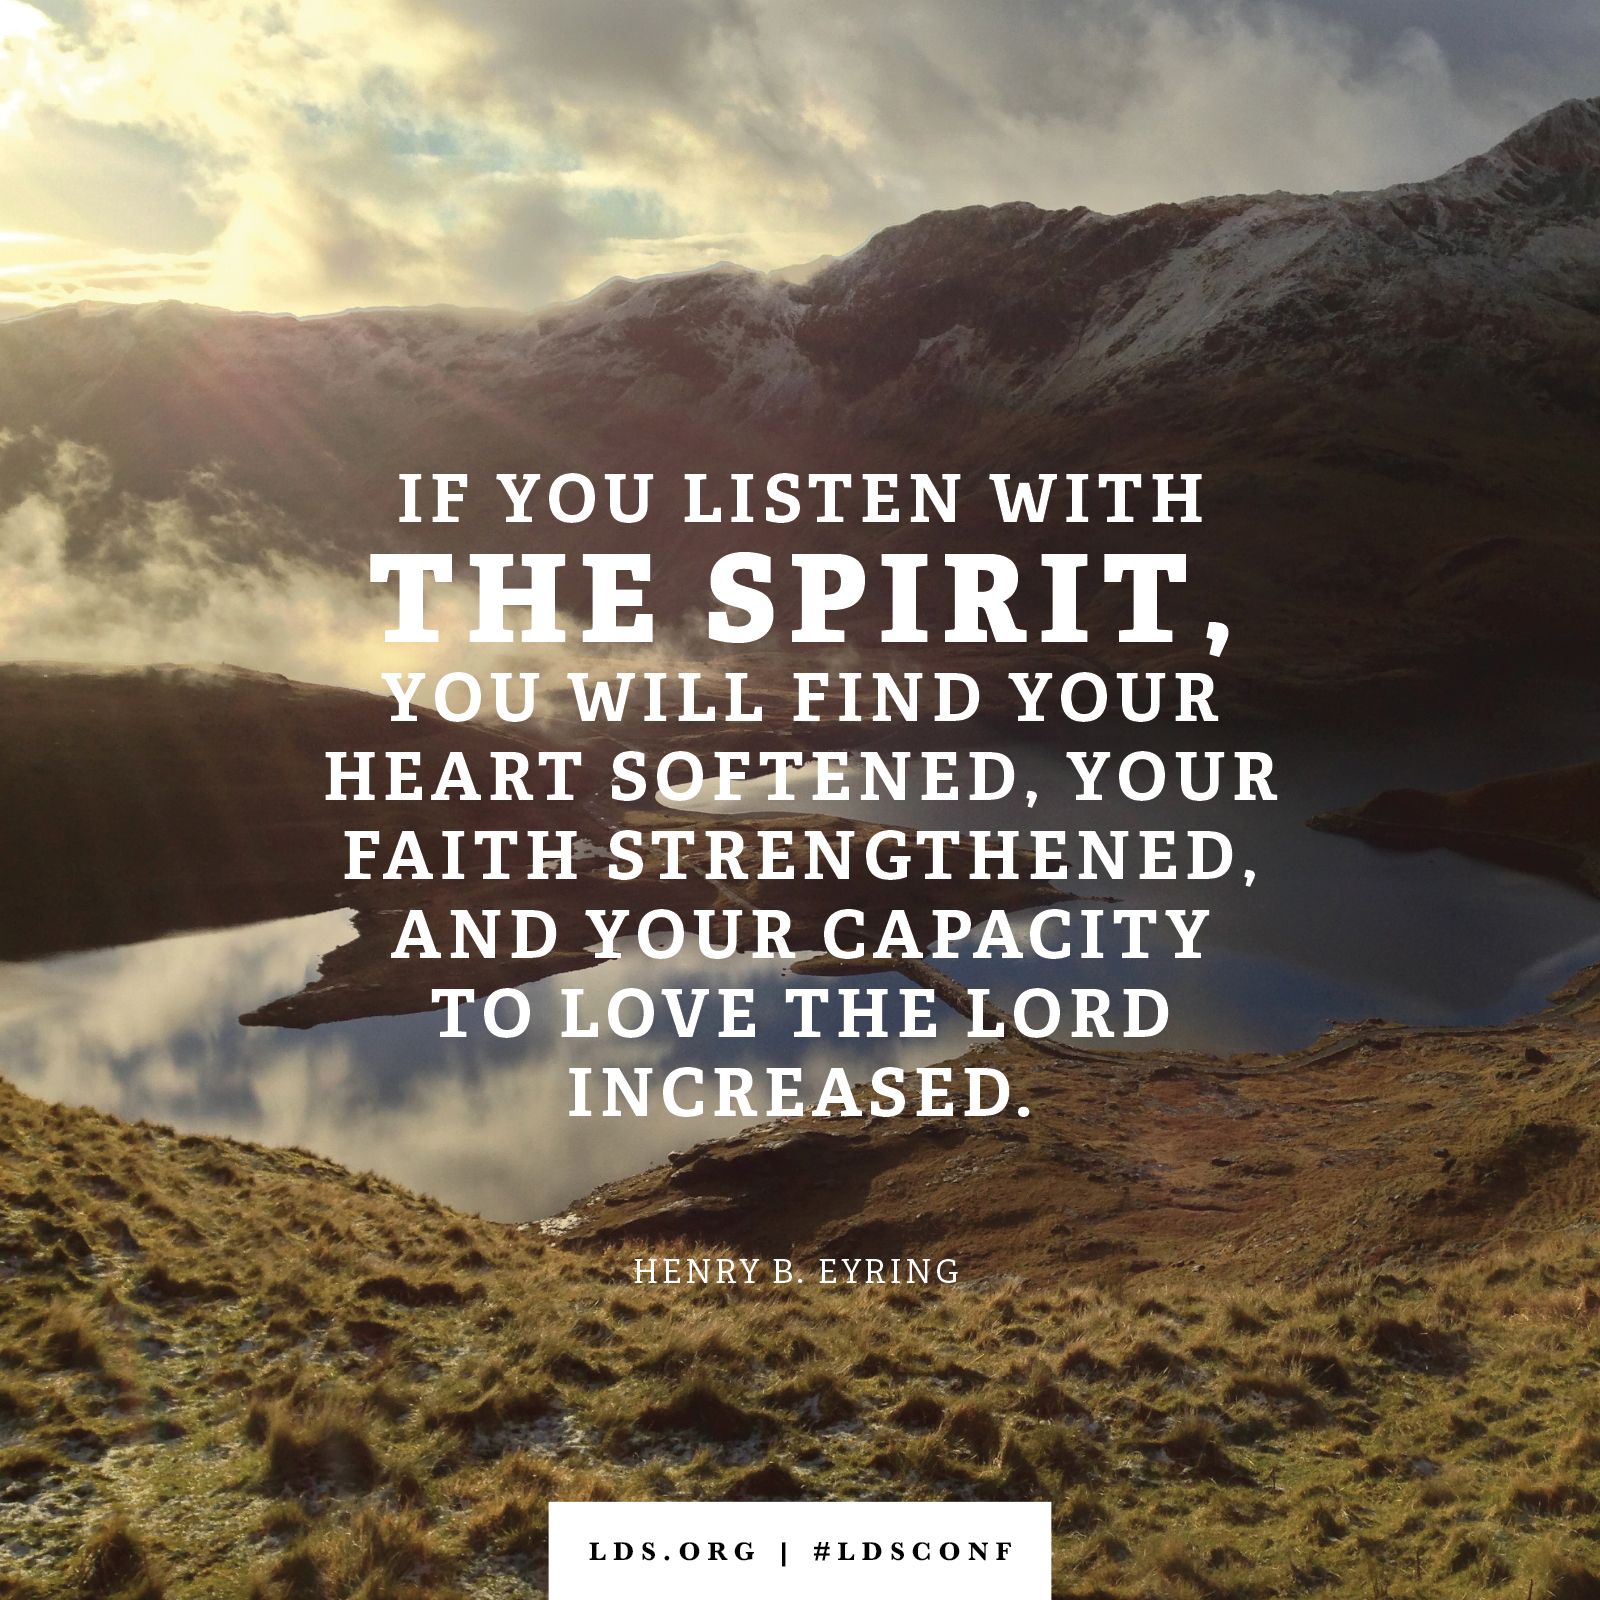 “If you listen with the Spirit, you will find your heart softened, your faith strengthened, and your capacity to love the Lord increased.” —President Henry B. Eyring, “Where Two or Three Are Gathered”